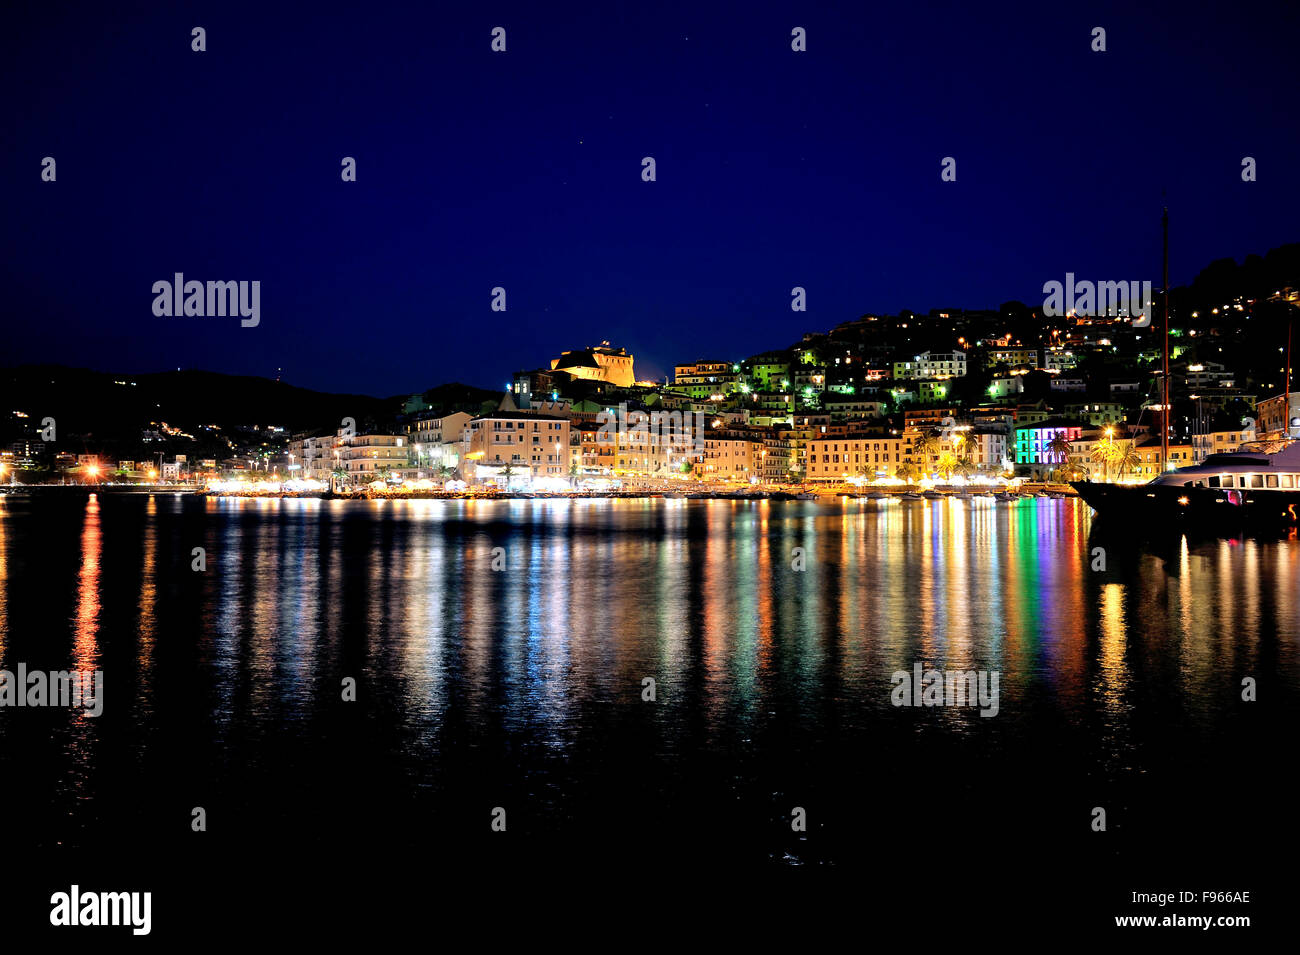 Night shot panorama, colorful lighting at night with reflection in the harbor of town Porto Santo Stefano, coast of Tuscany, Italy Stock Photo